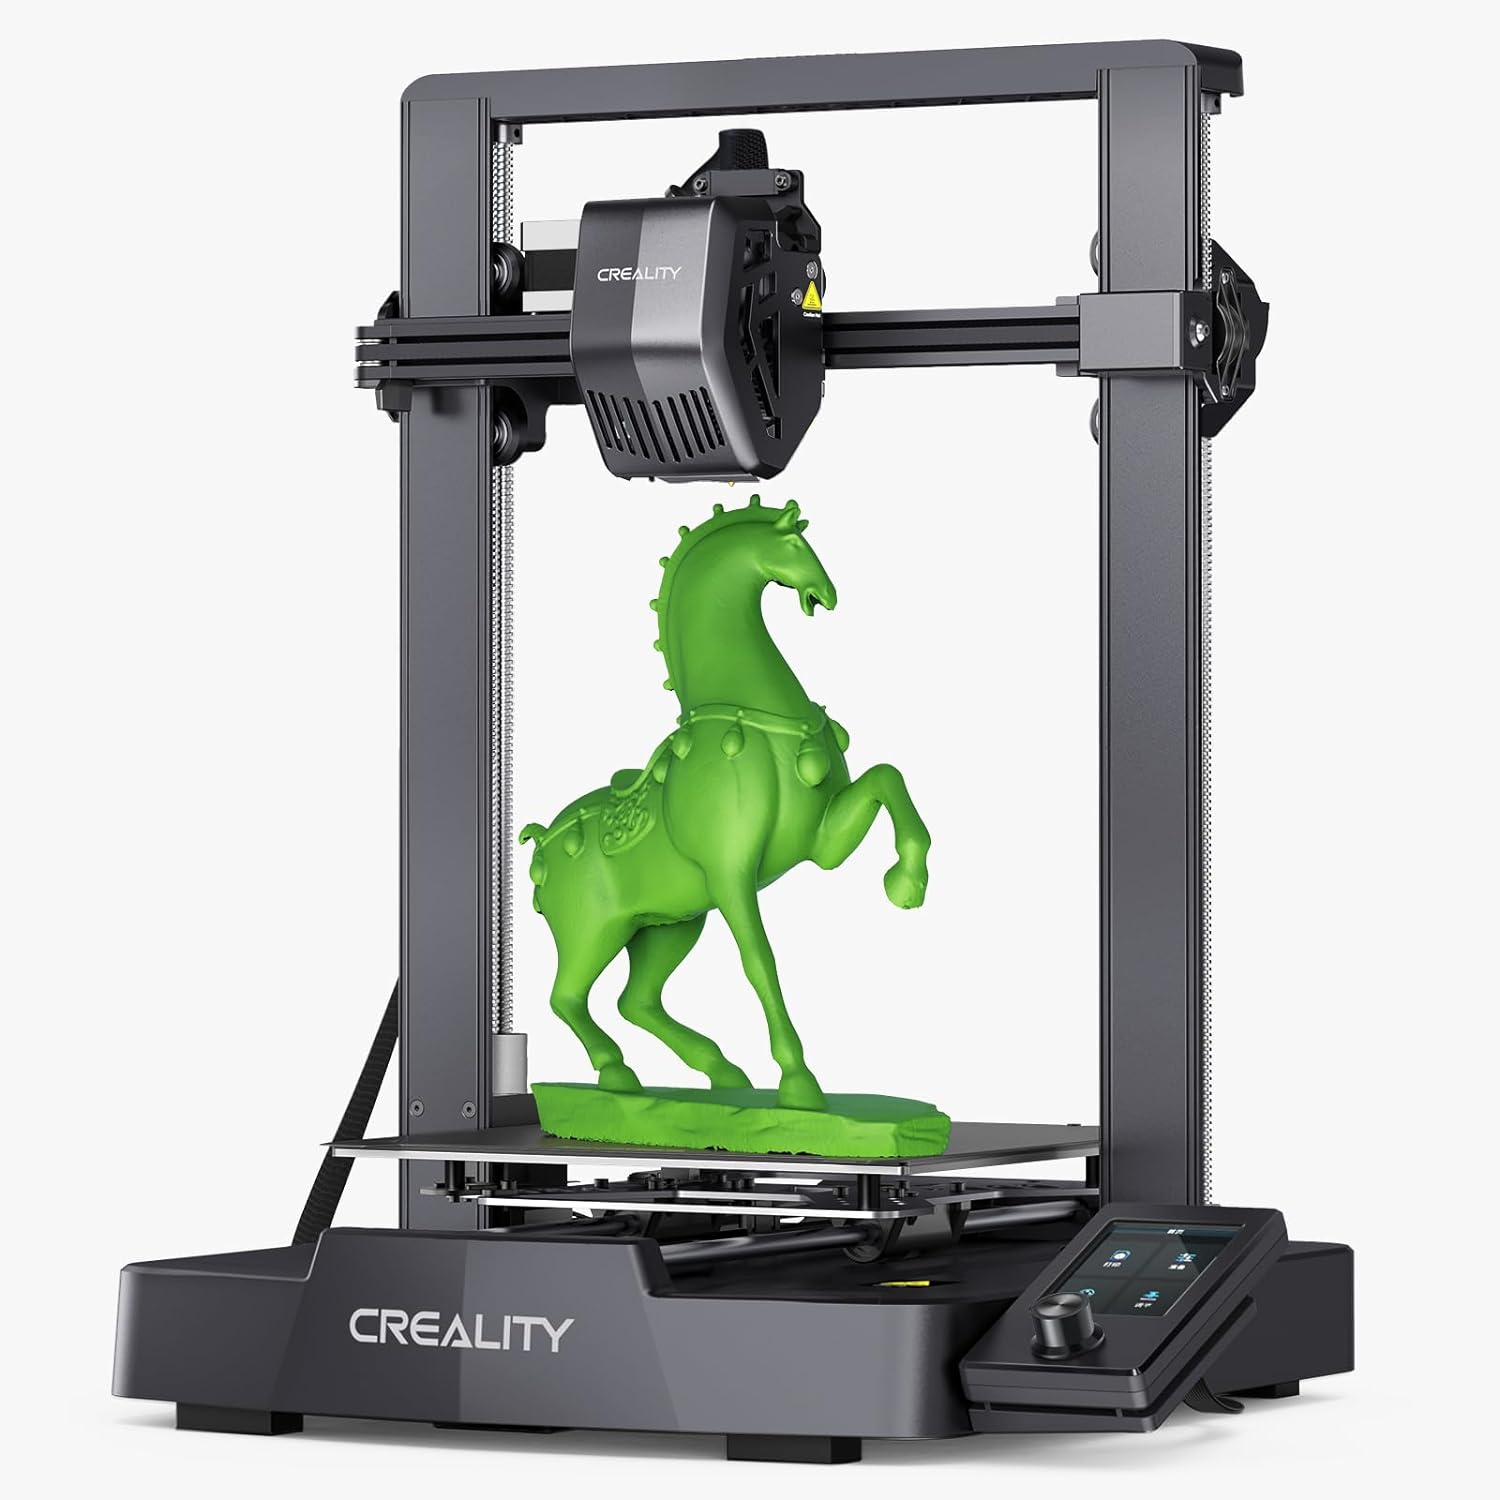 creality-ender-3-v3-se-3d-printer-250mms-cr-touch-auto-leveling-fdm-3d-printer-with-sprite-direct-extruder-dual-z-axis-y Creality Ender 3 V3 SE 3D Printer Review